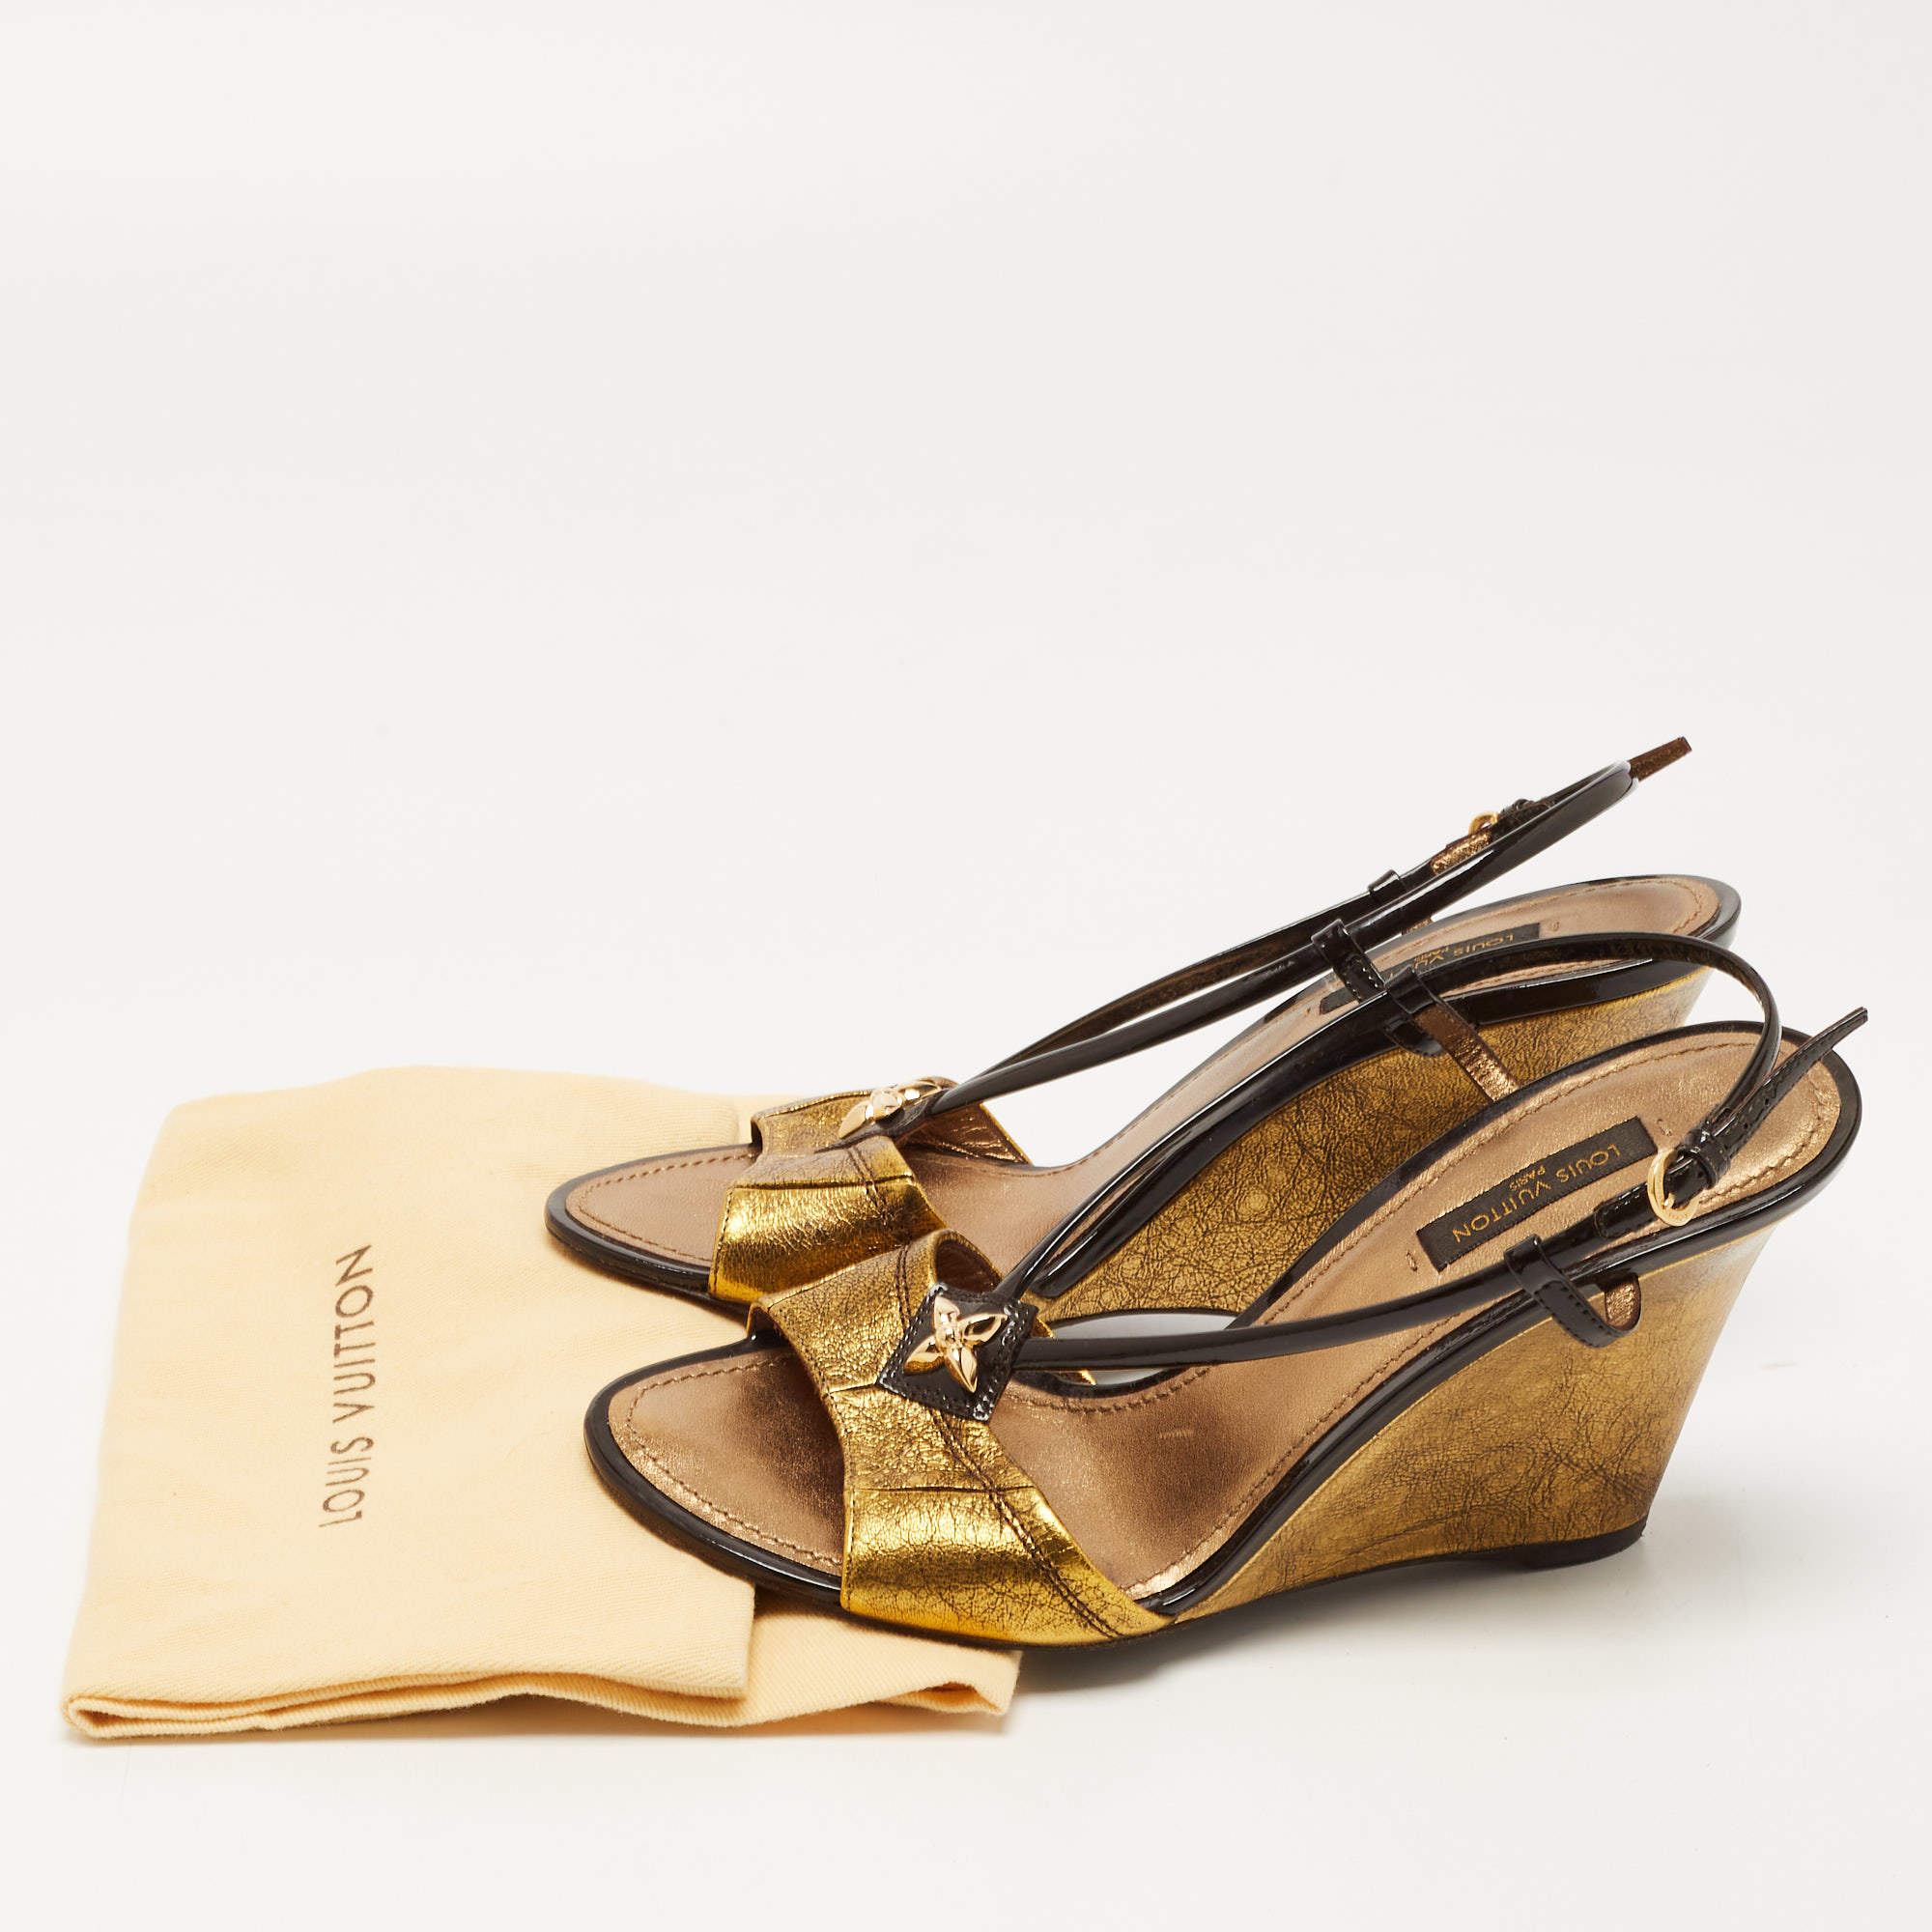 Louis Vuitton Metallic/Brown Leather Slingback Wedge Sandals